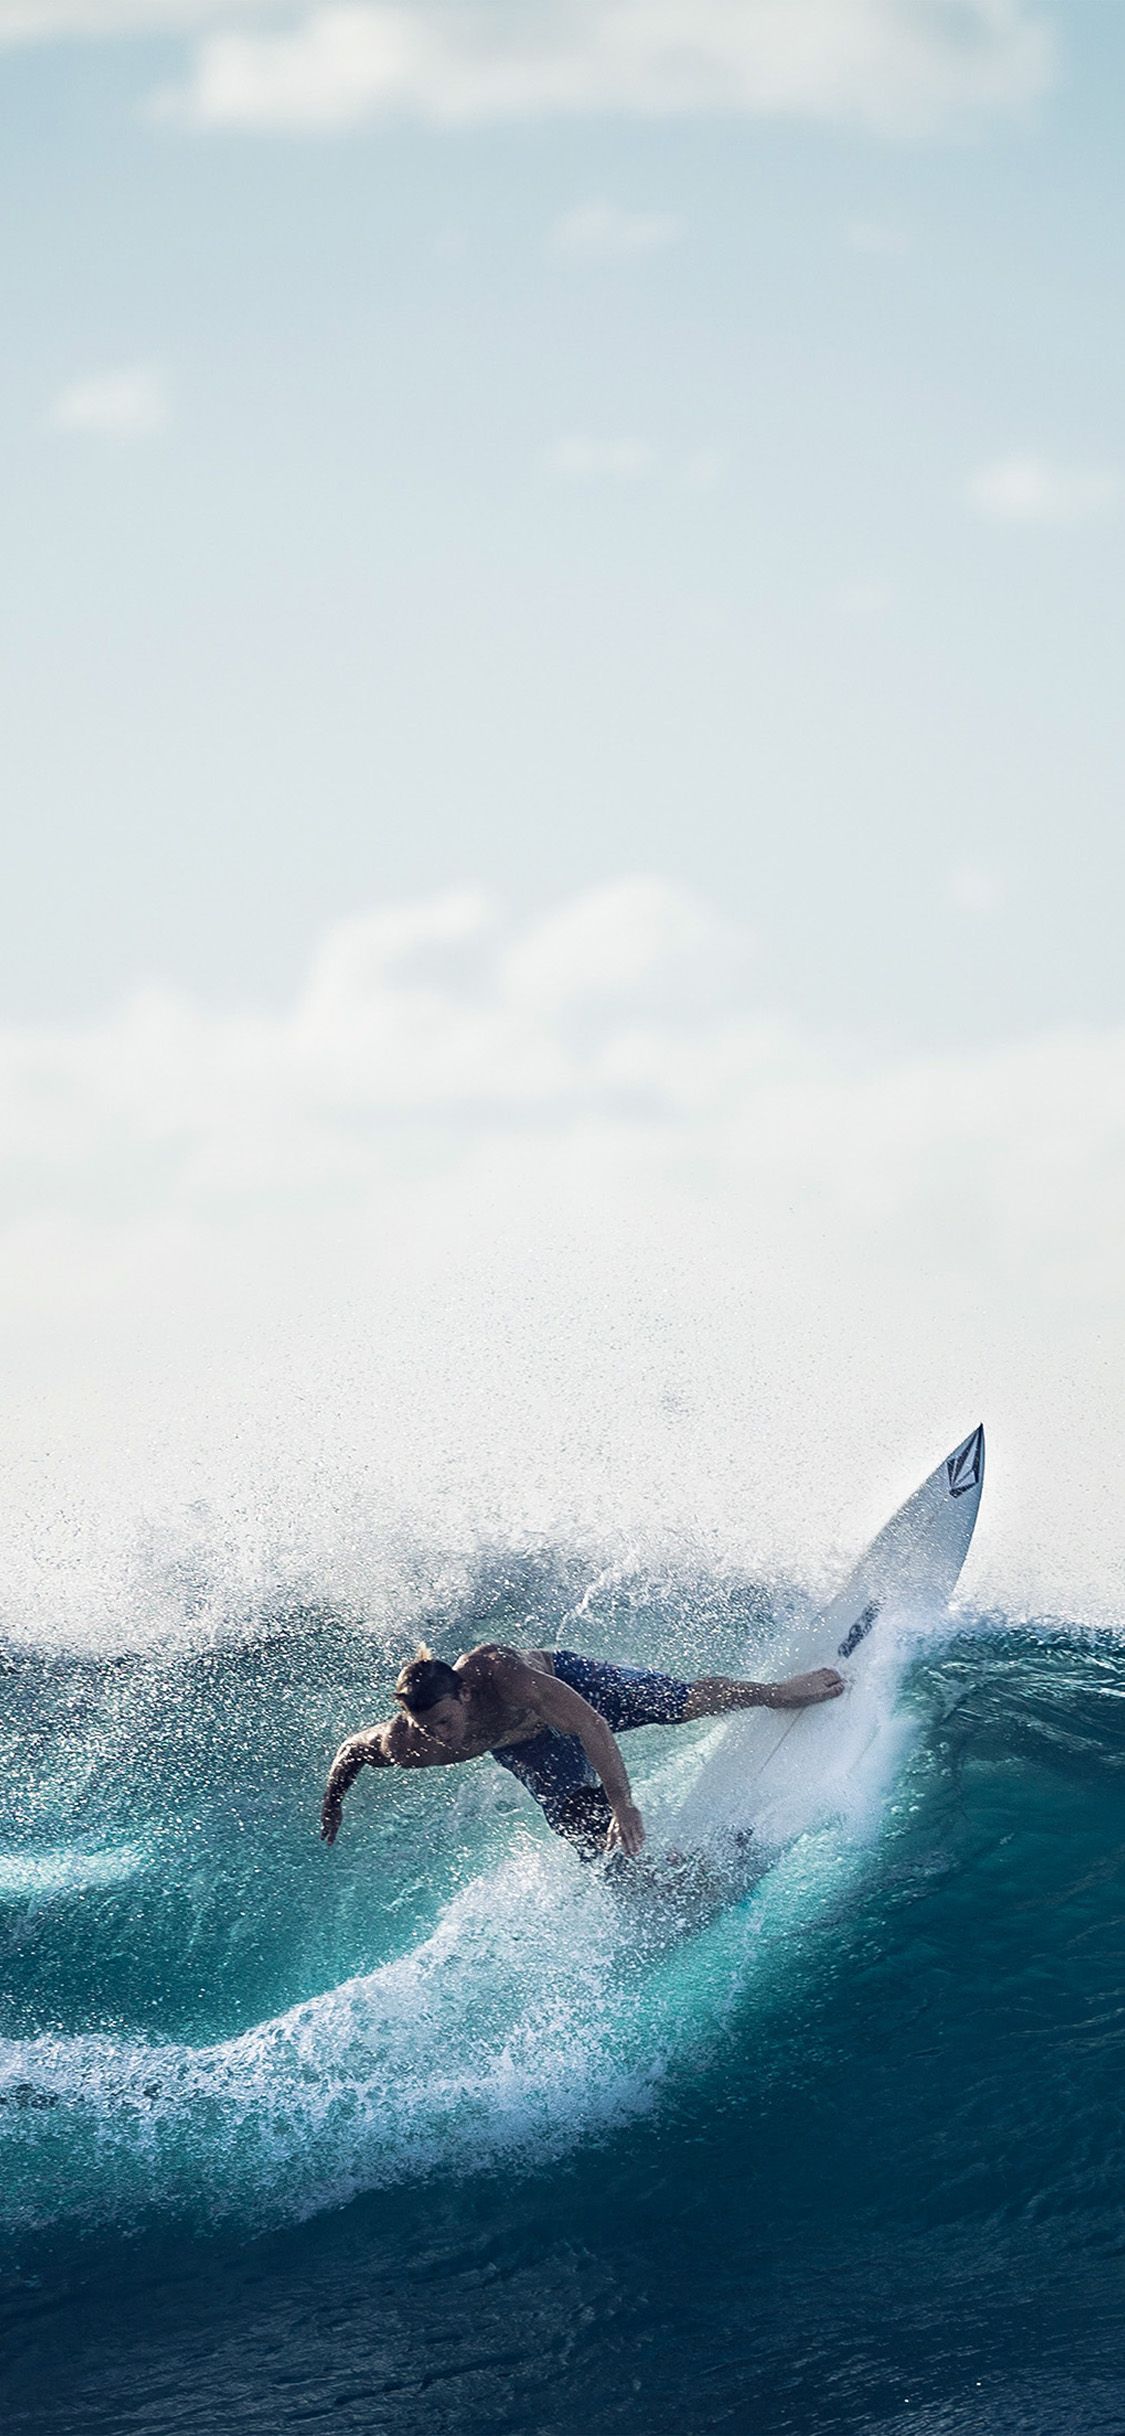 Surfing iPhone Wallpaper Top Background